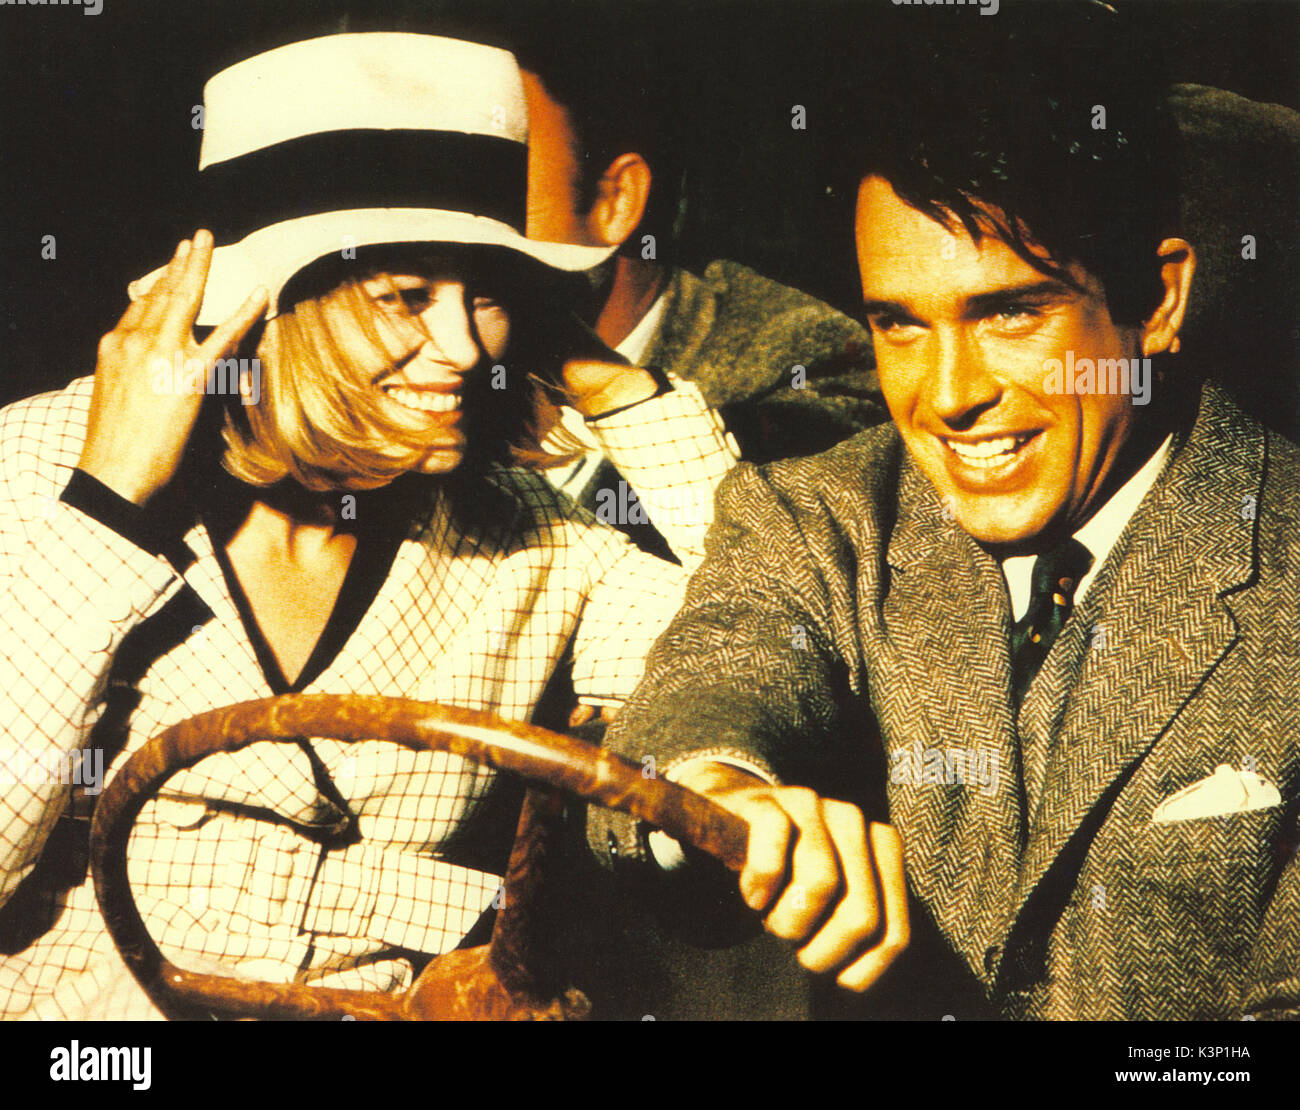 BONNIE AND CLYDE [US 1967] FAYE DUNAWAY as Bonnie Parker, WARREN BEATTY as Clyde Barrow     Date: 1967 Stock Photo